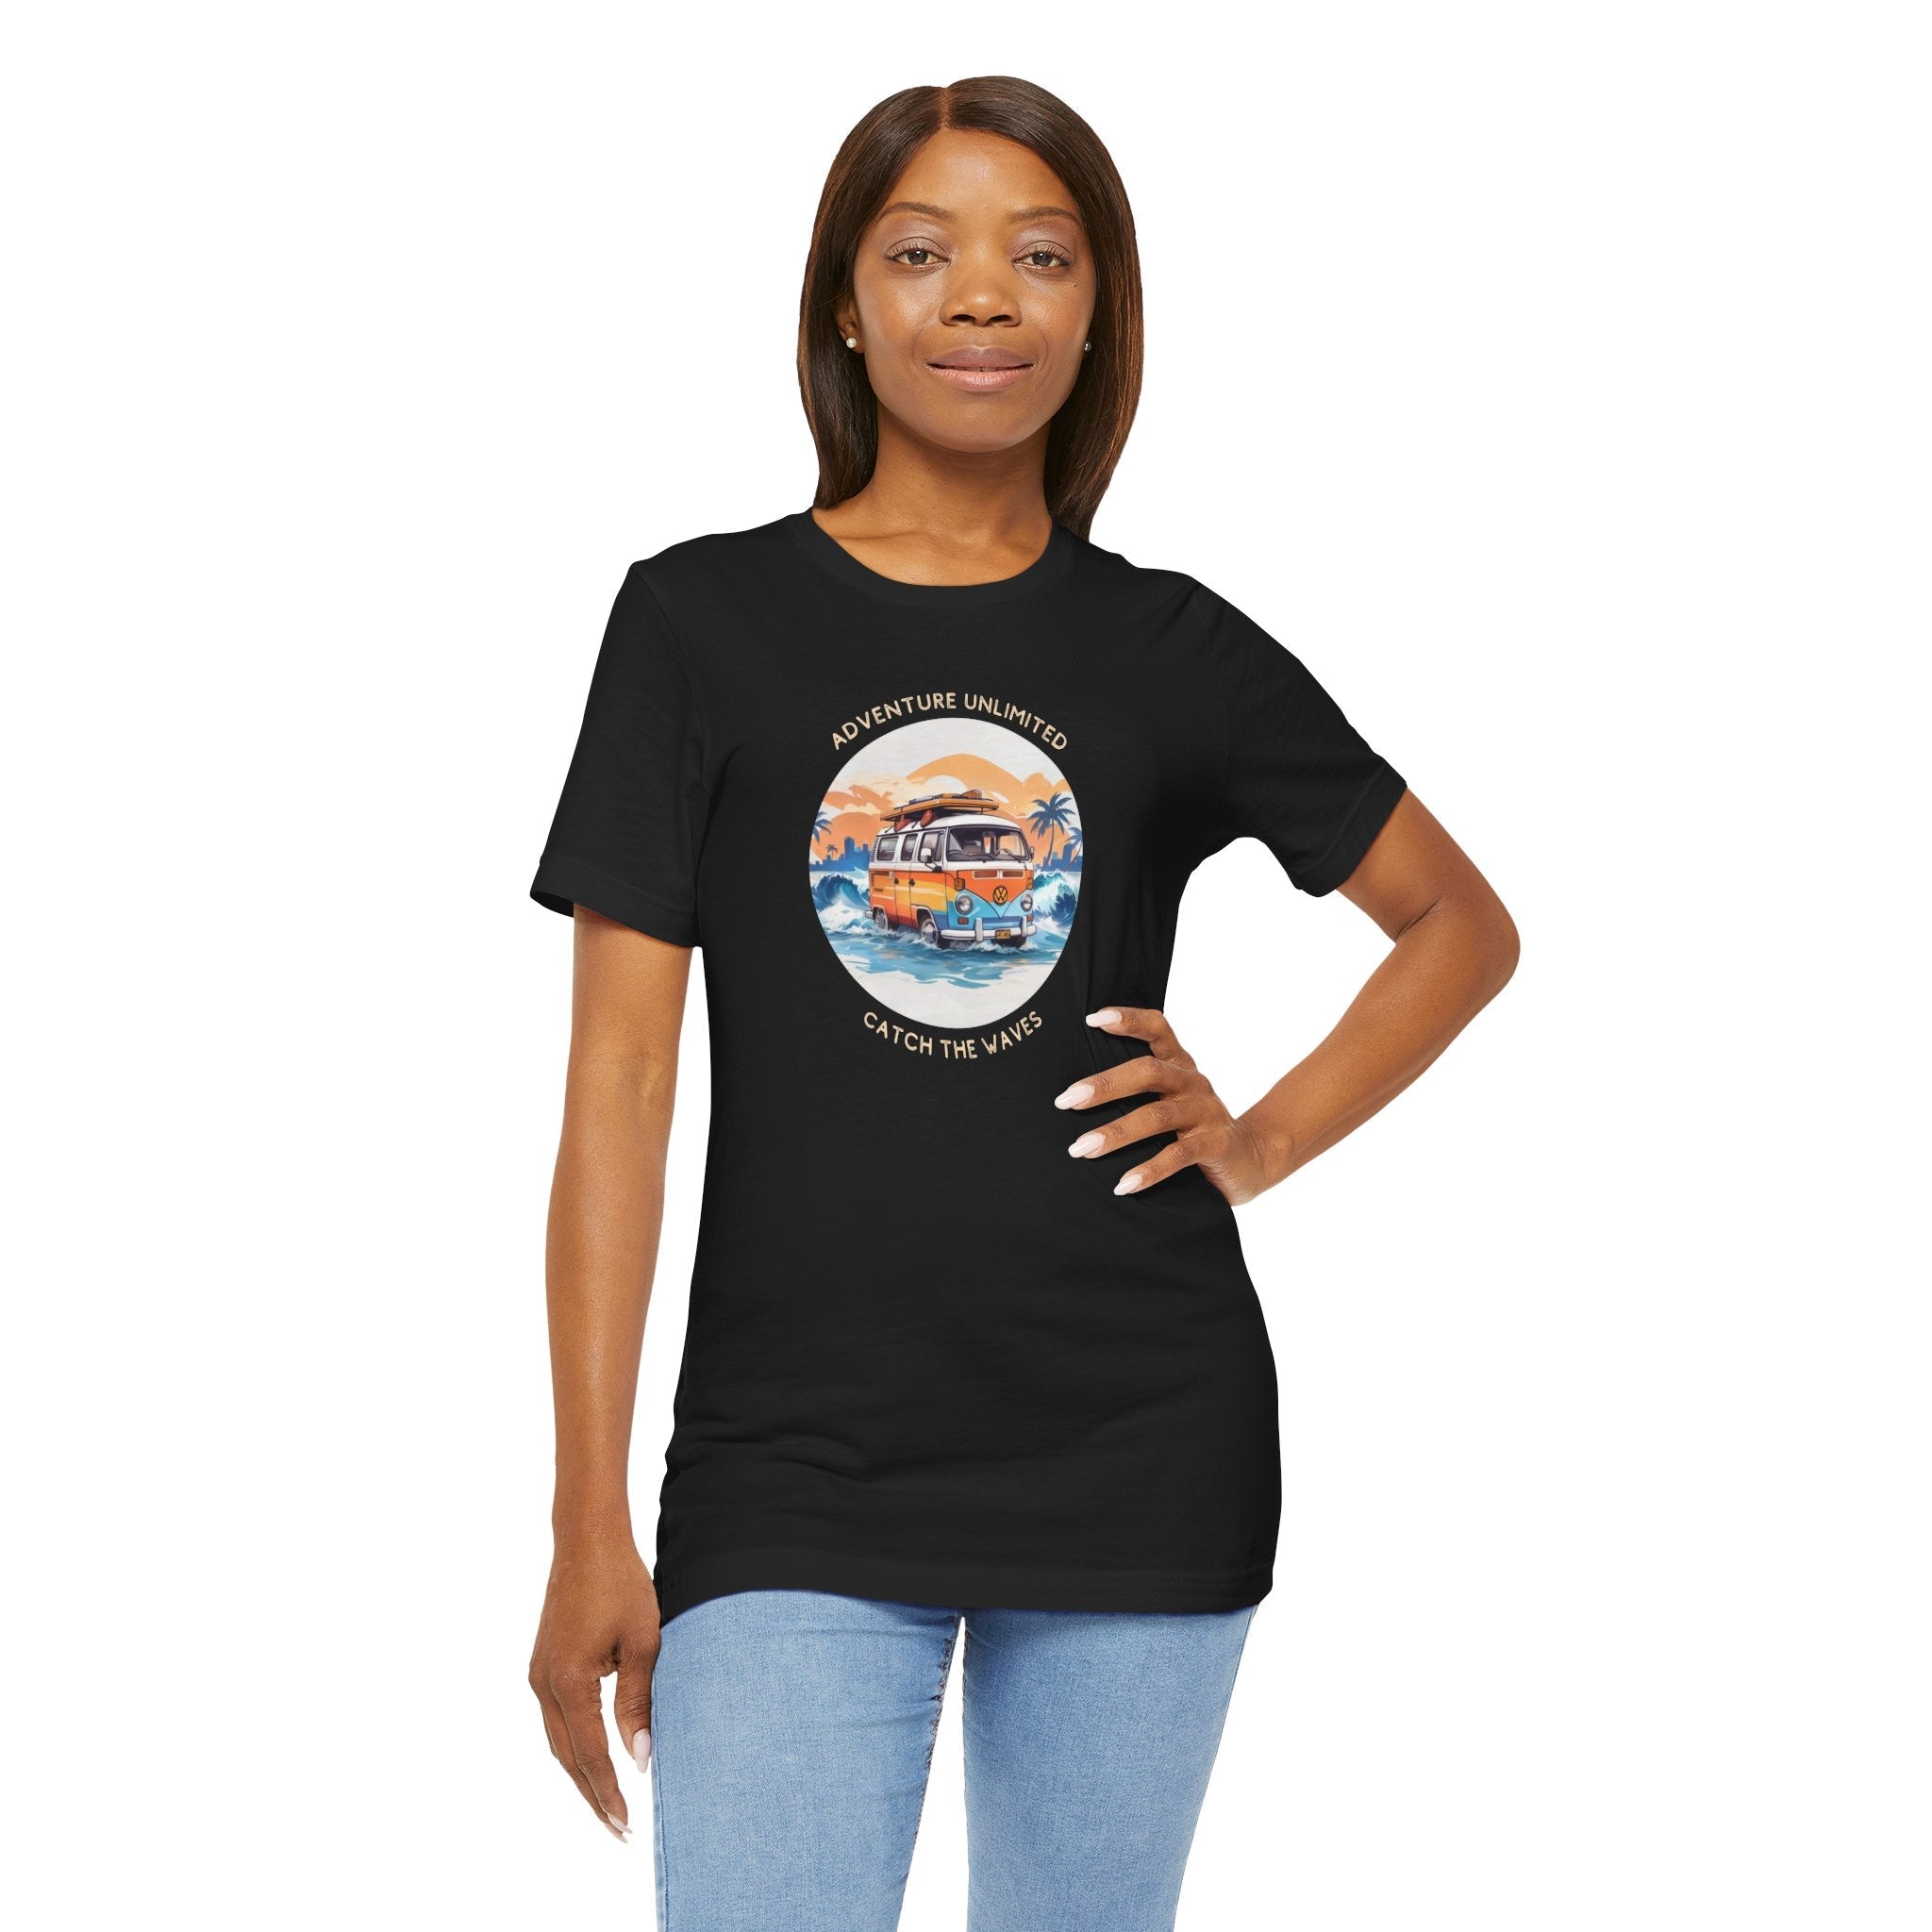 Adventure Unlimited black t-shirt with printed text on woman